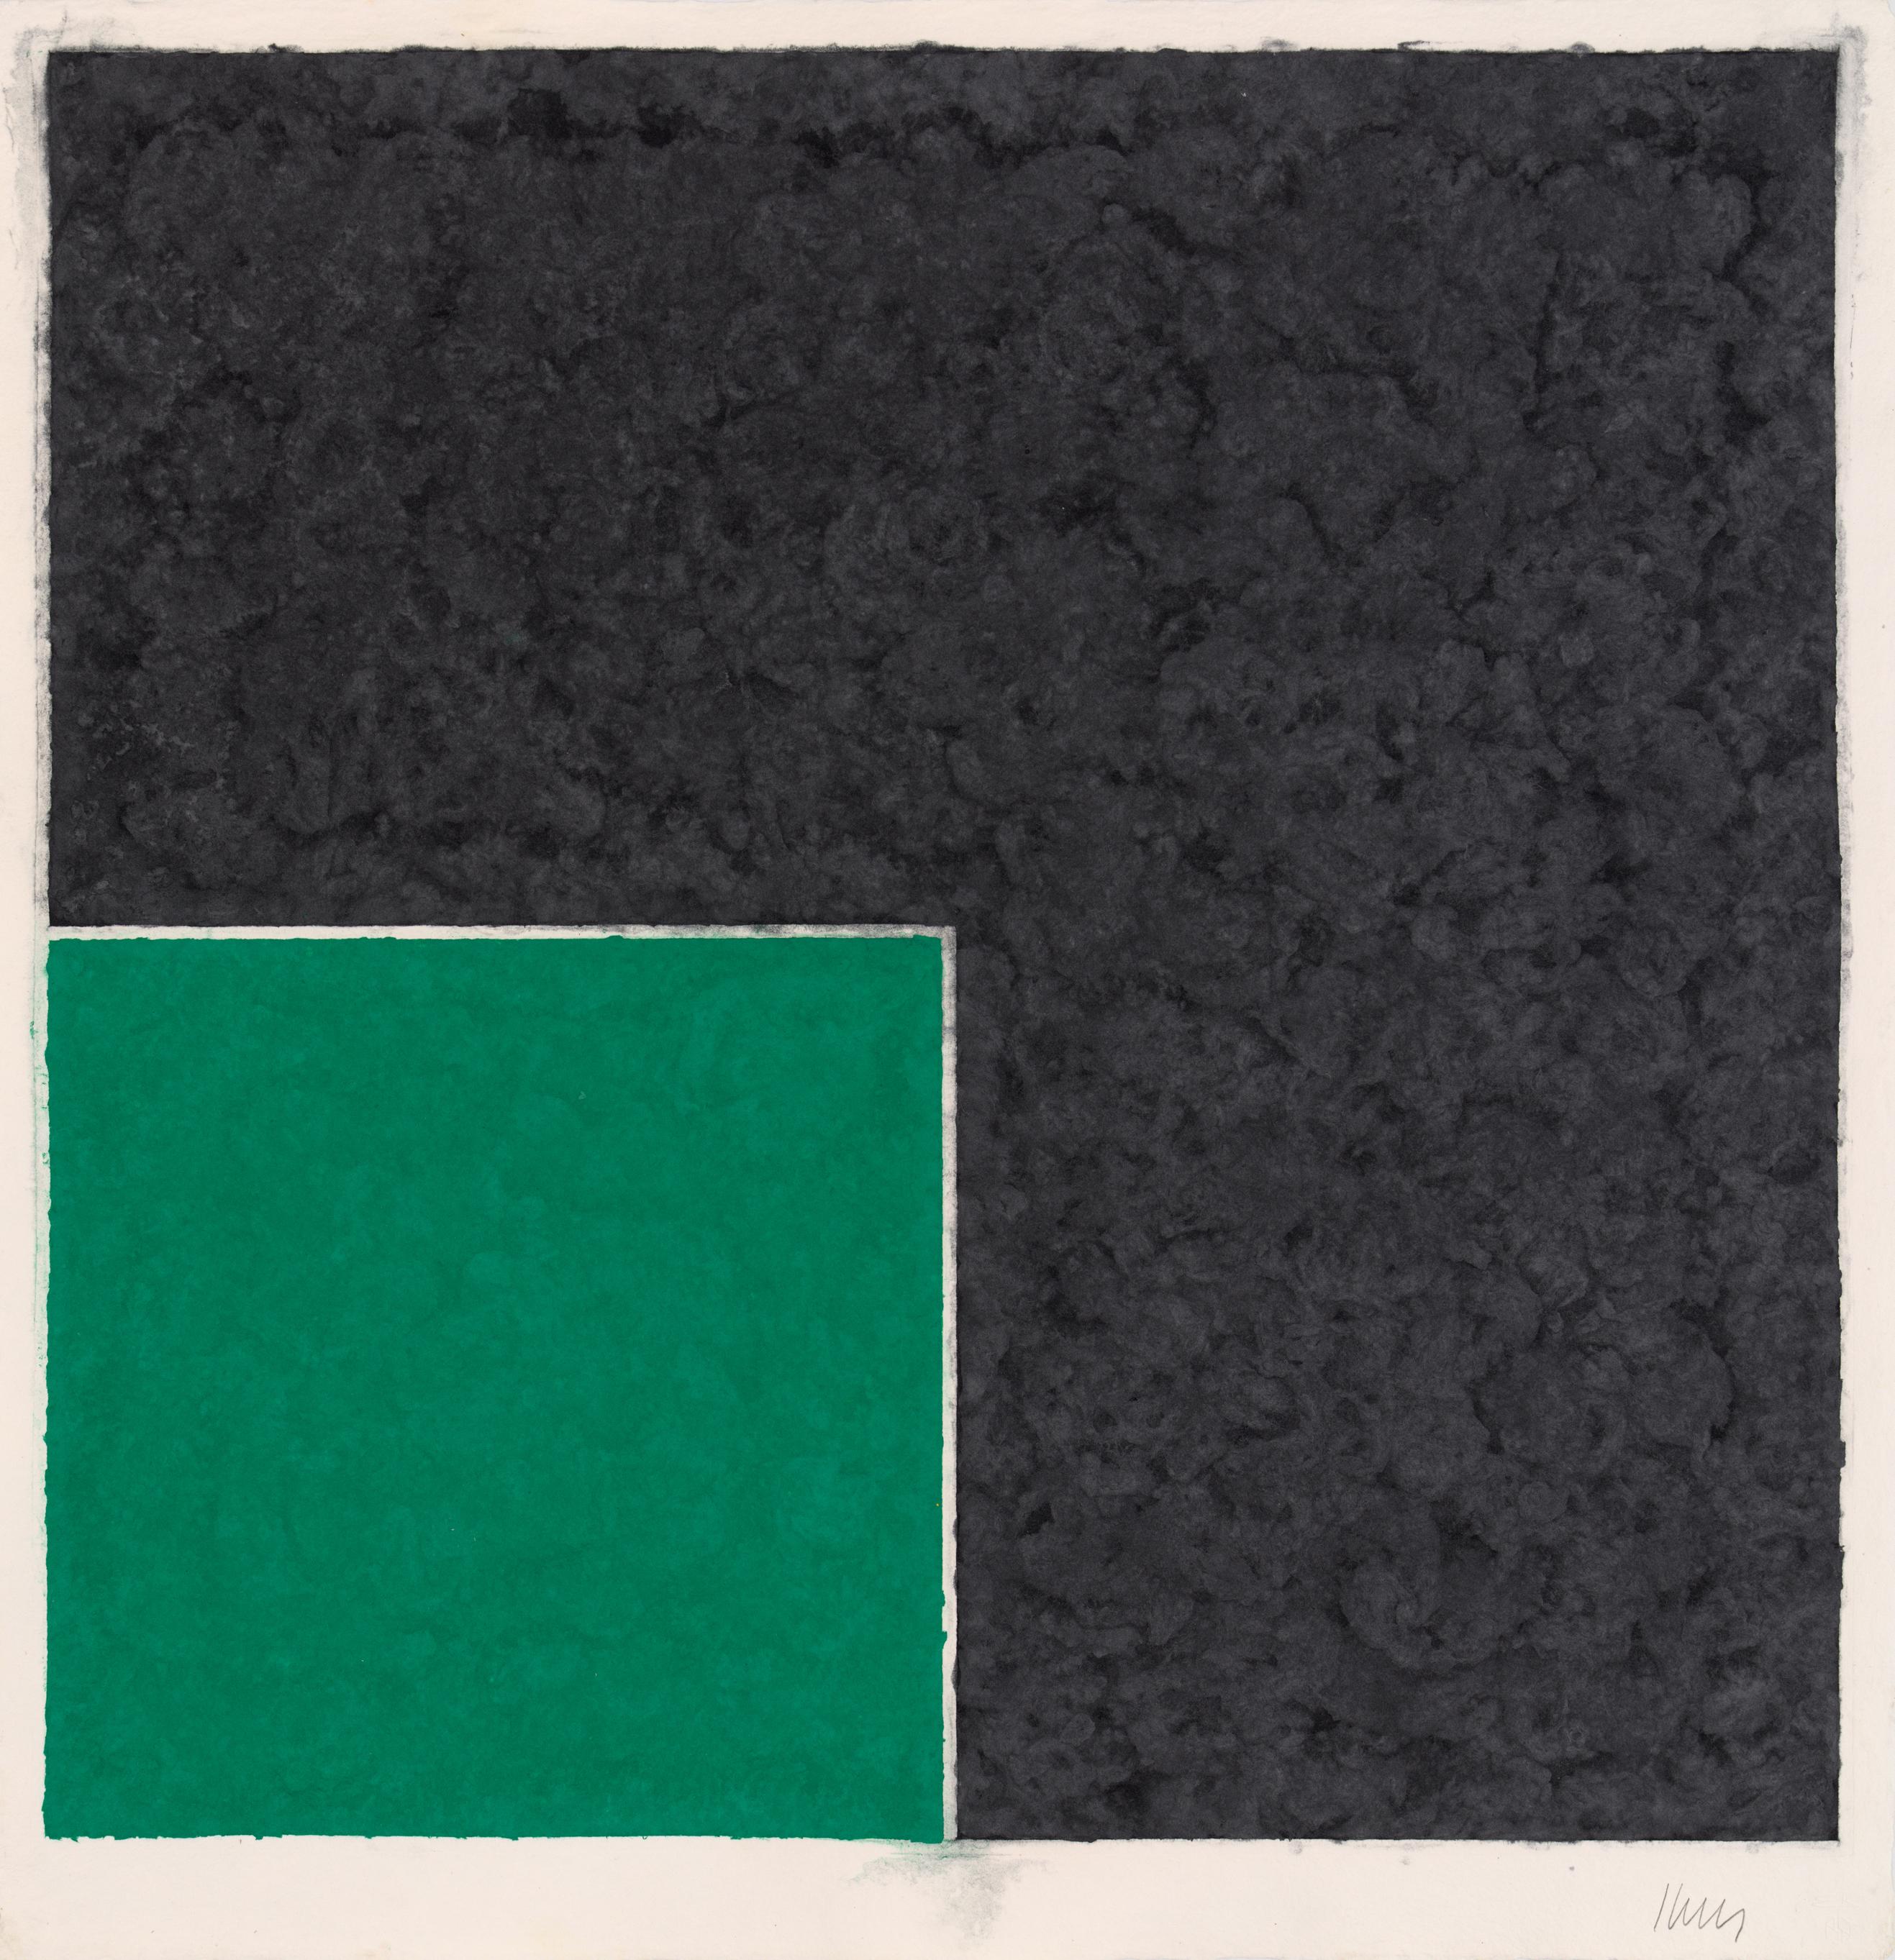 Ellsworth Kelly Abstract Print - Colored Paper Image XVIII (Green Square with Dark Gray)